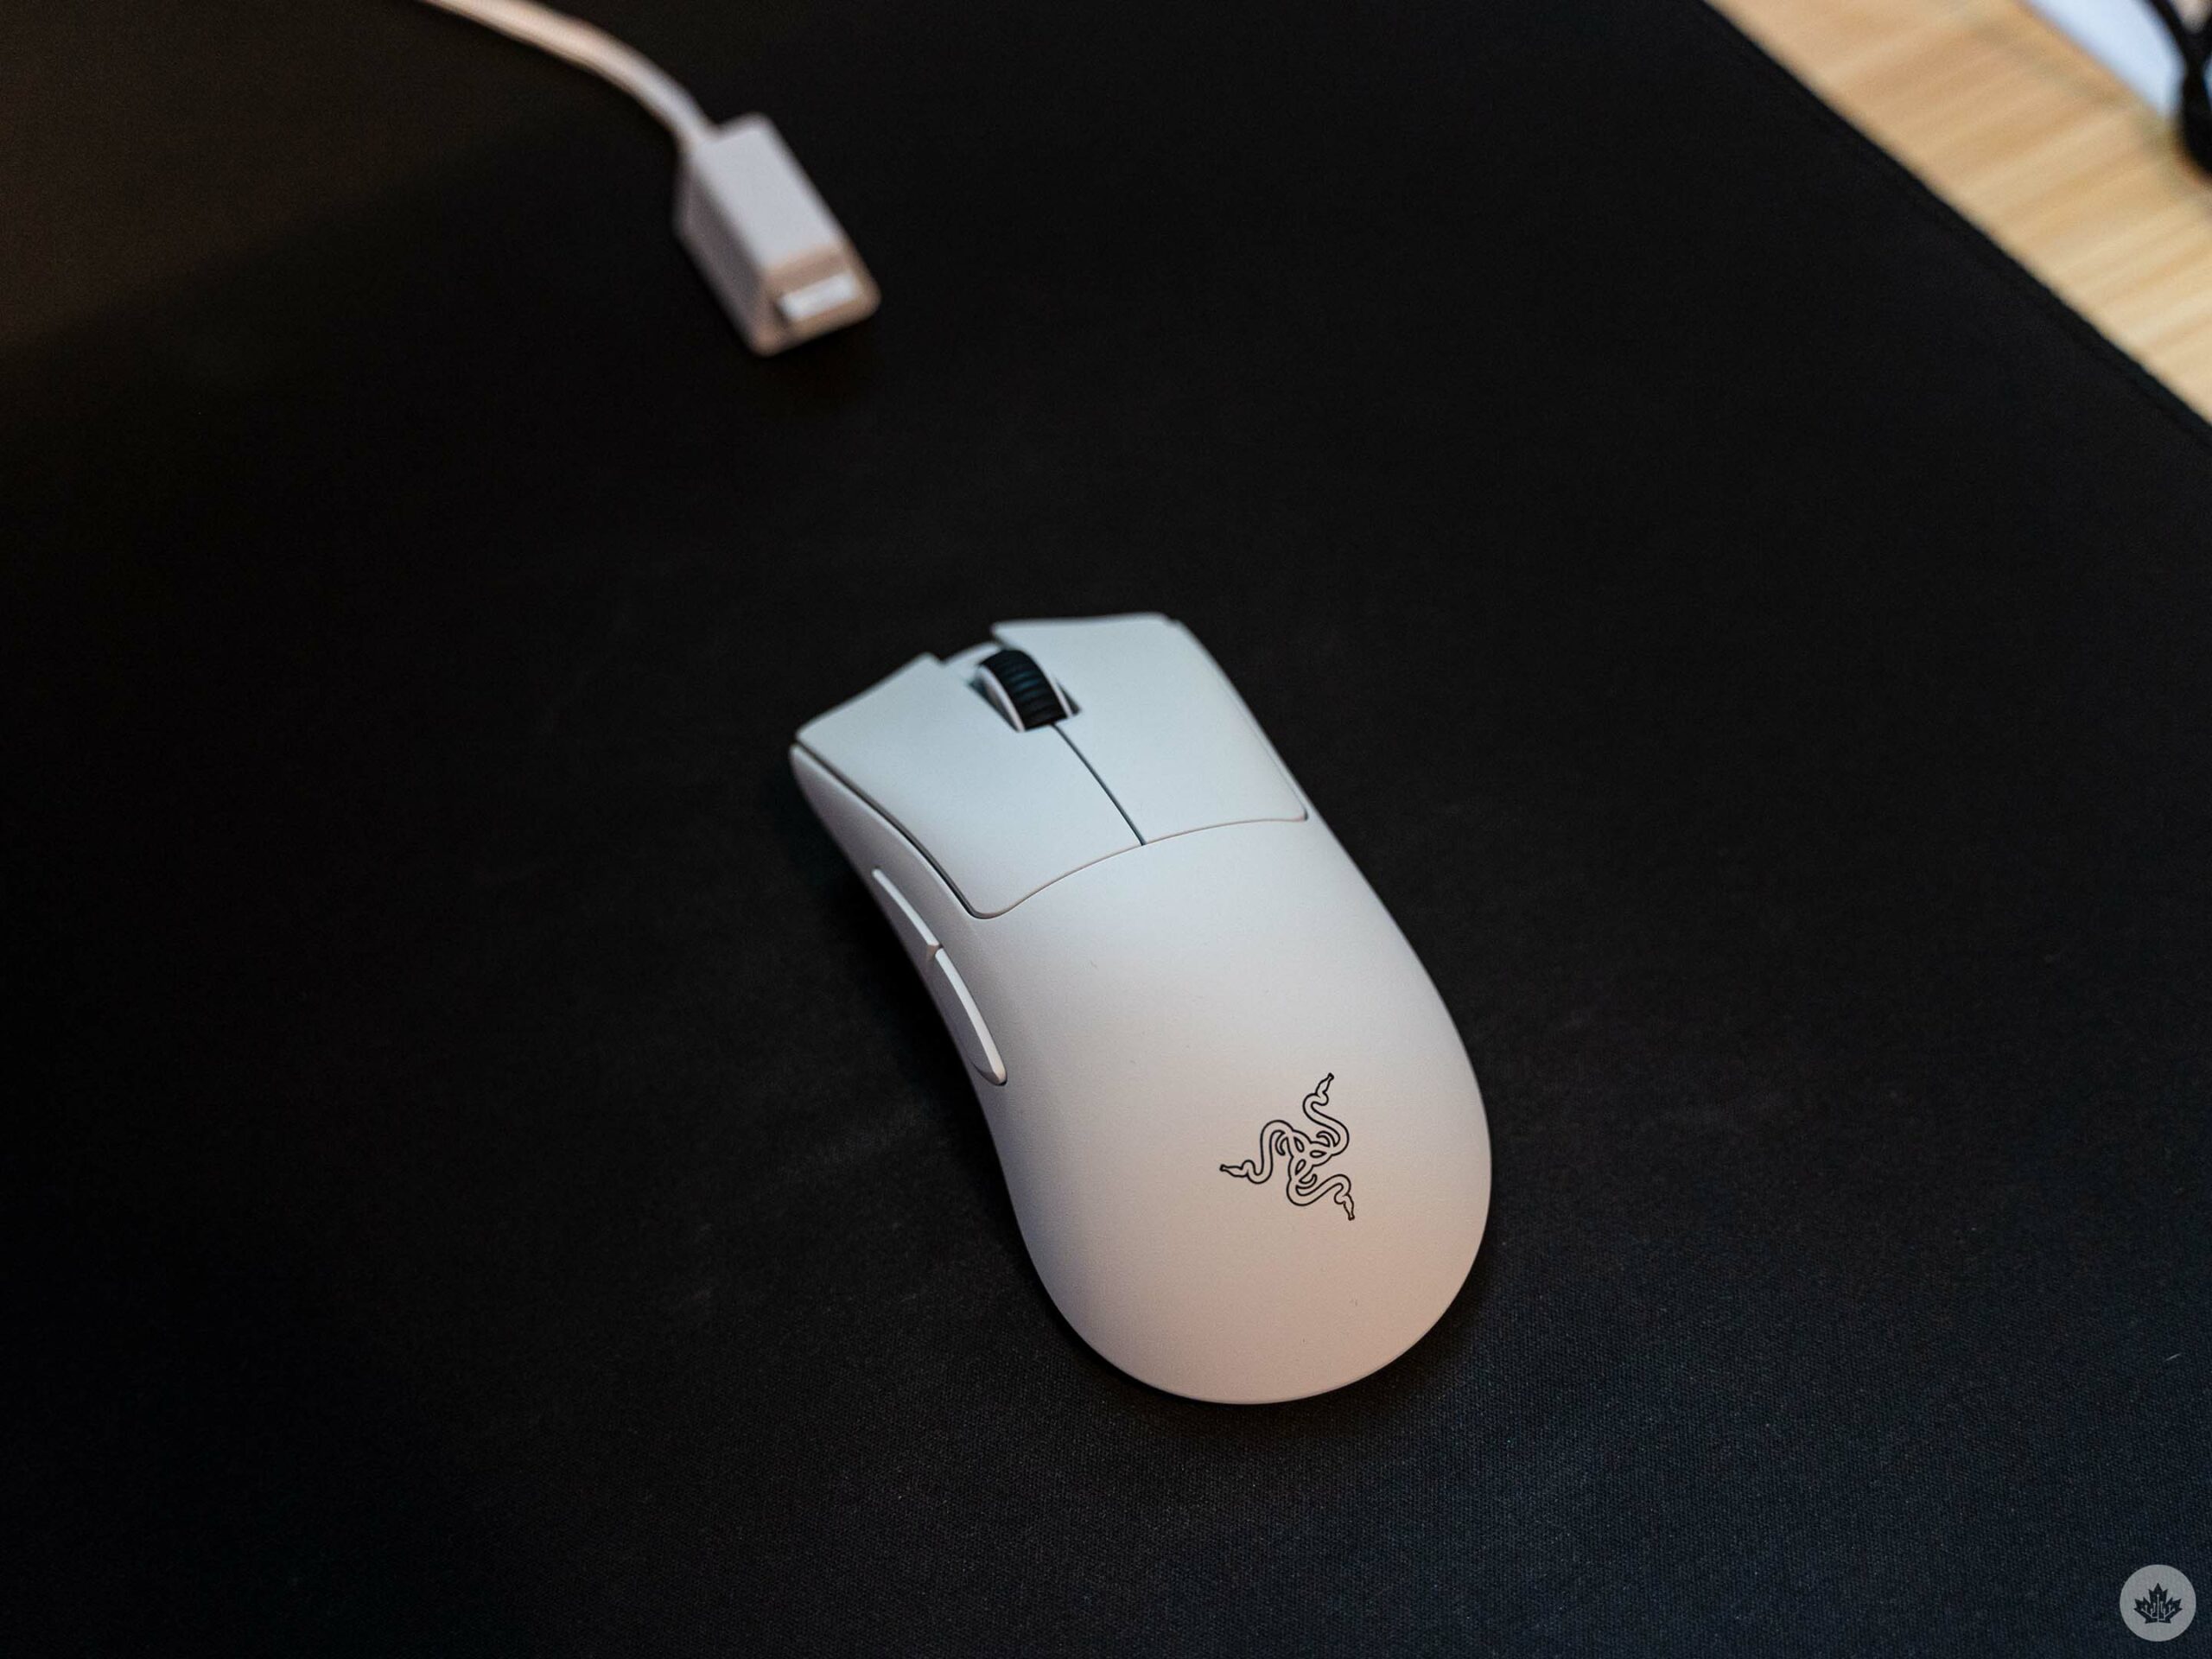 Razer's DeathAdder V3 Pro is a modern refresh of an old classic